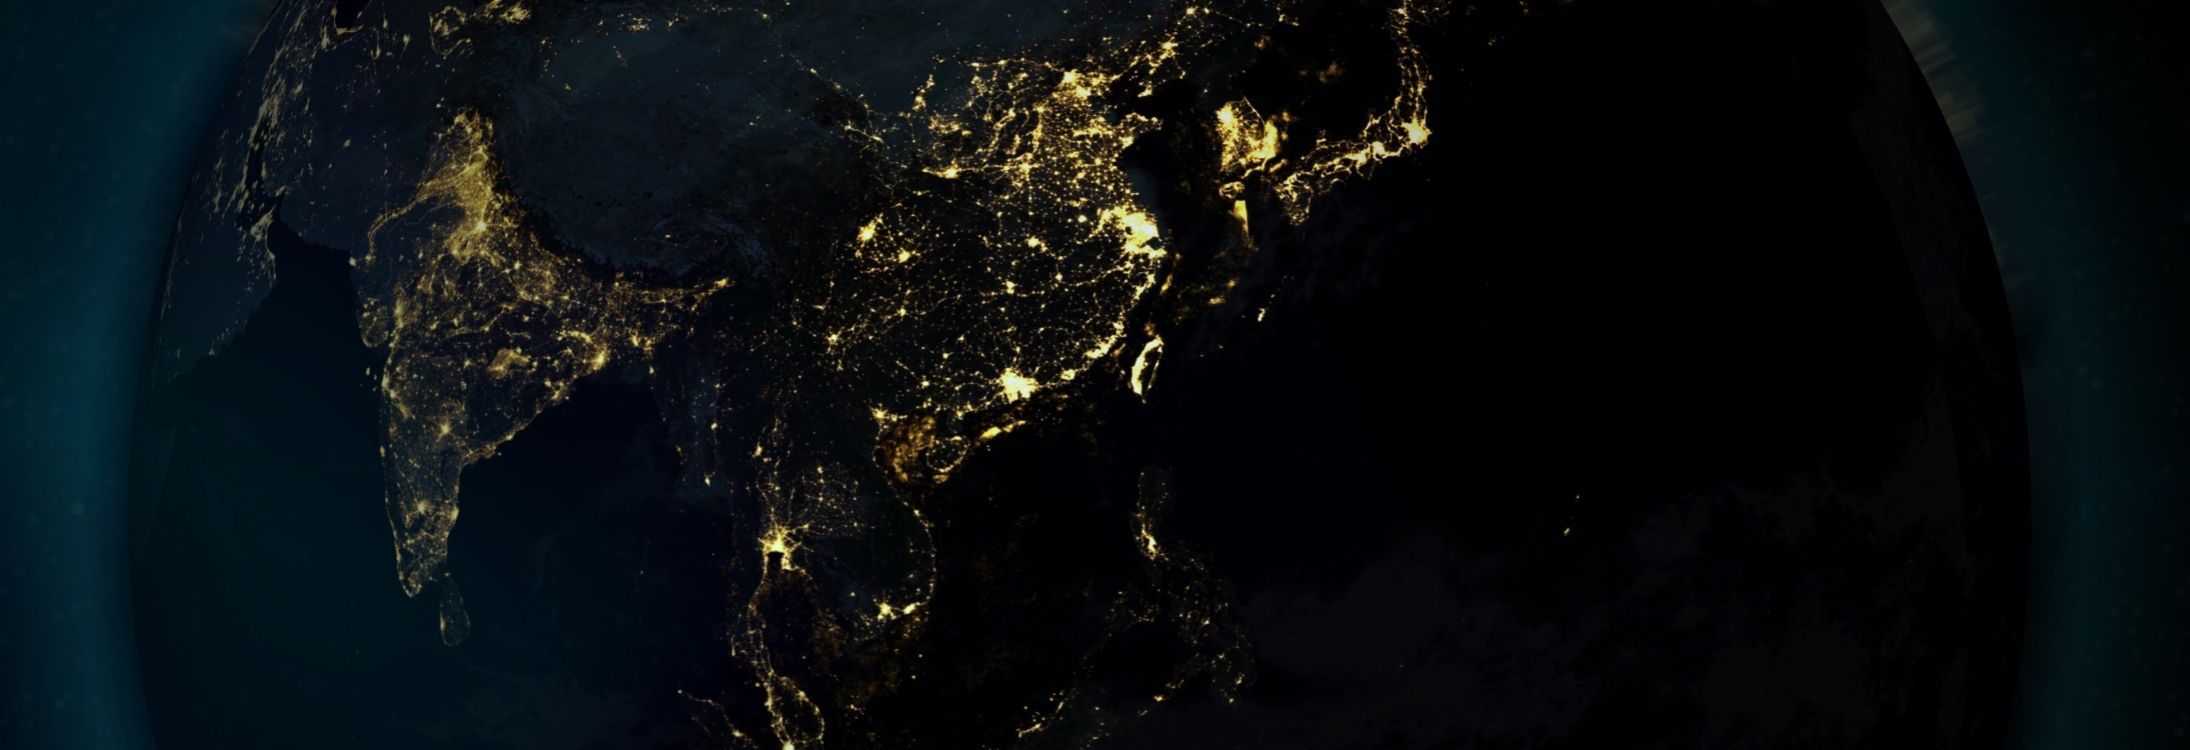 A picture of the world taken during Diwali from the space. Not!